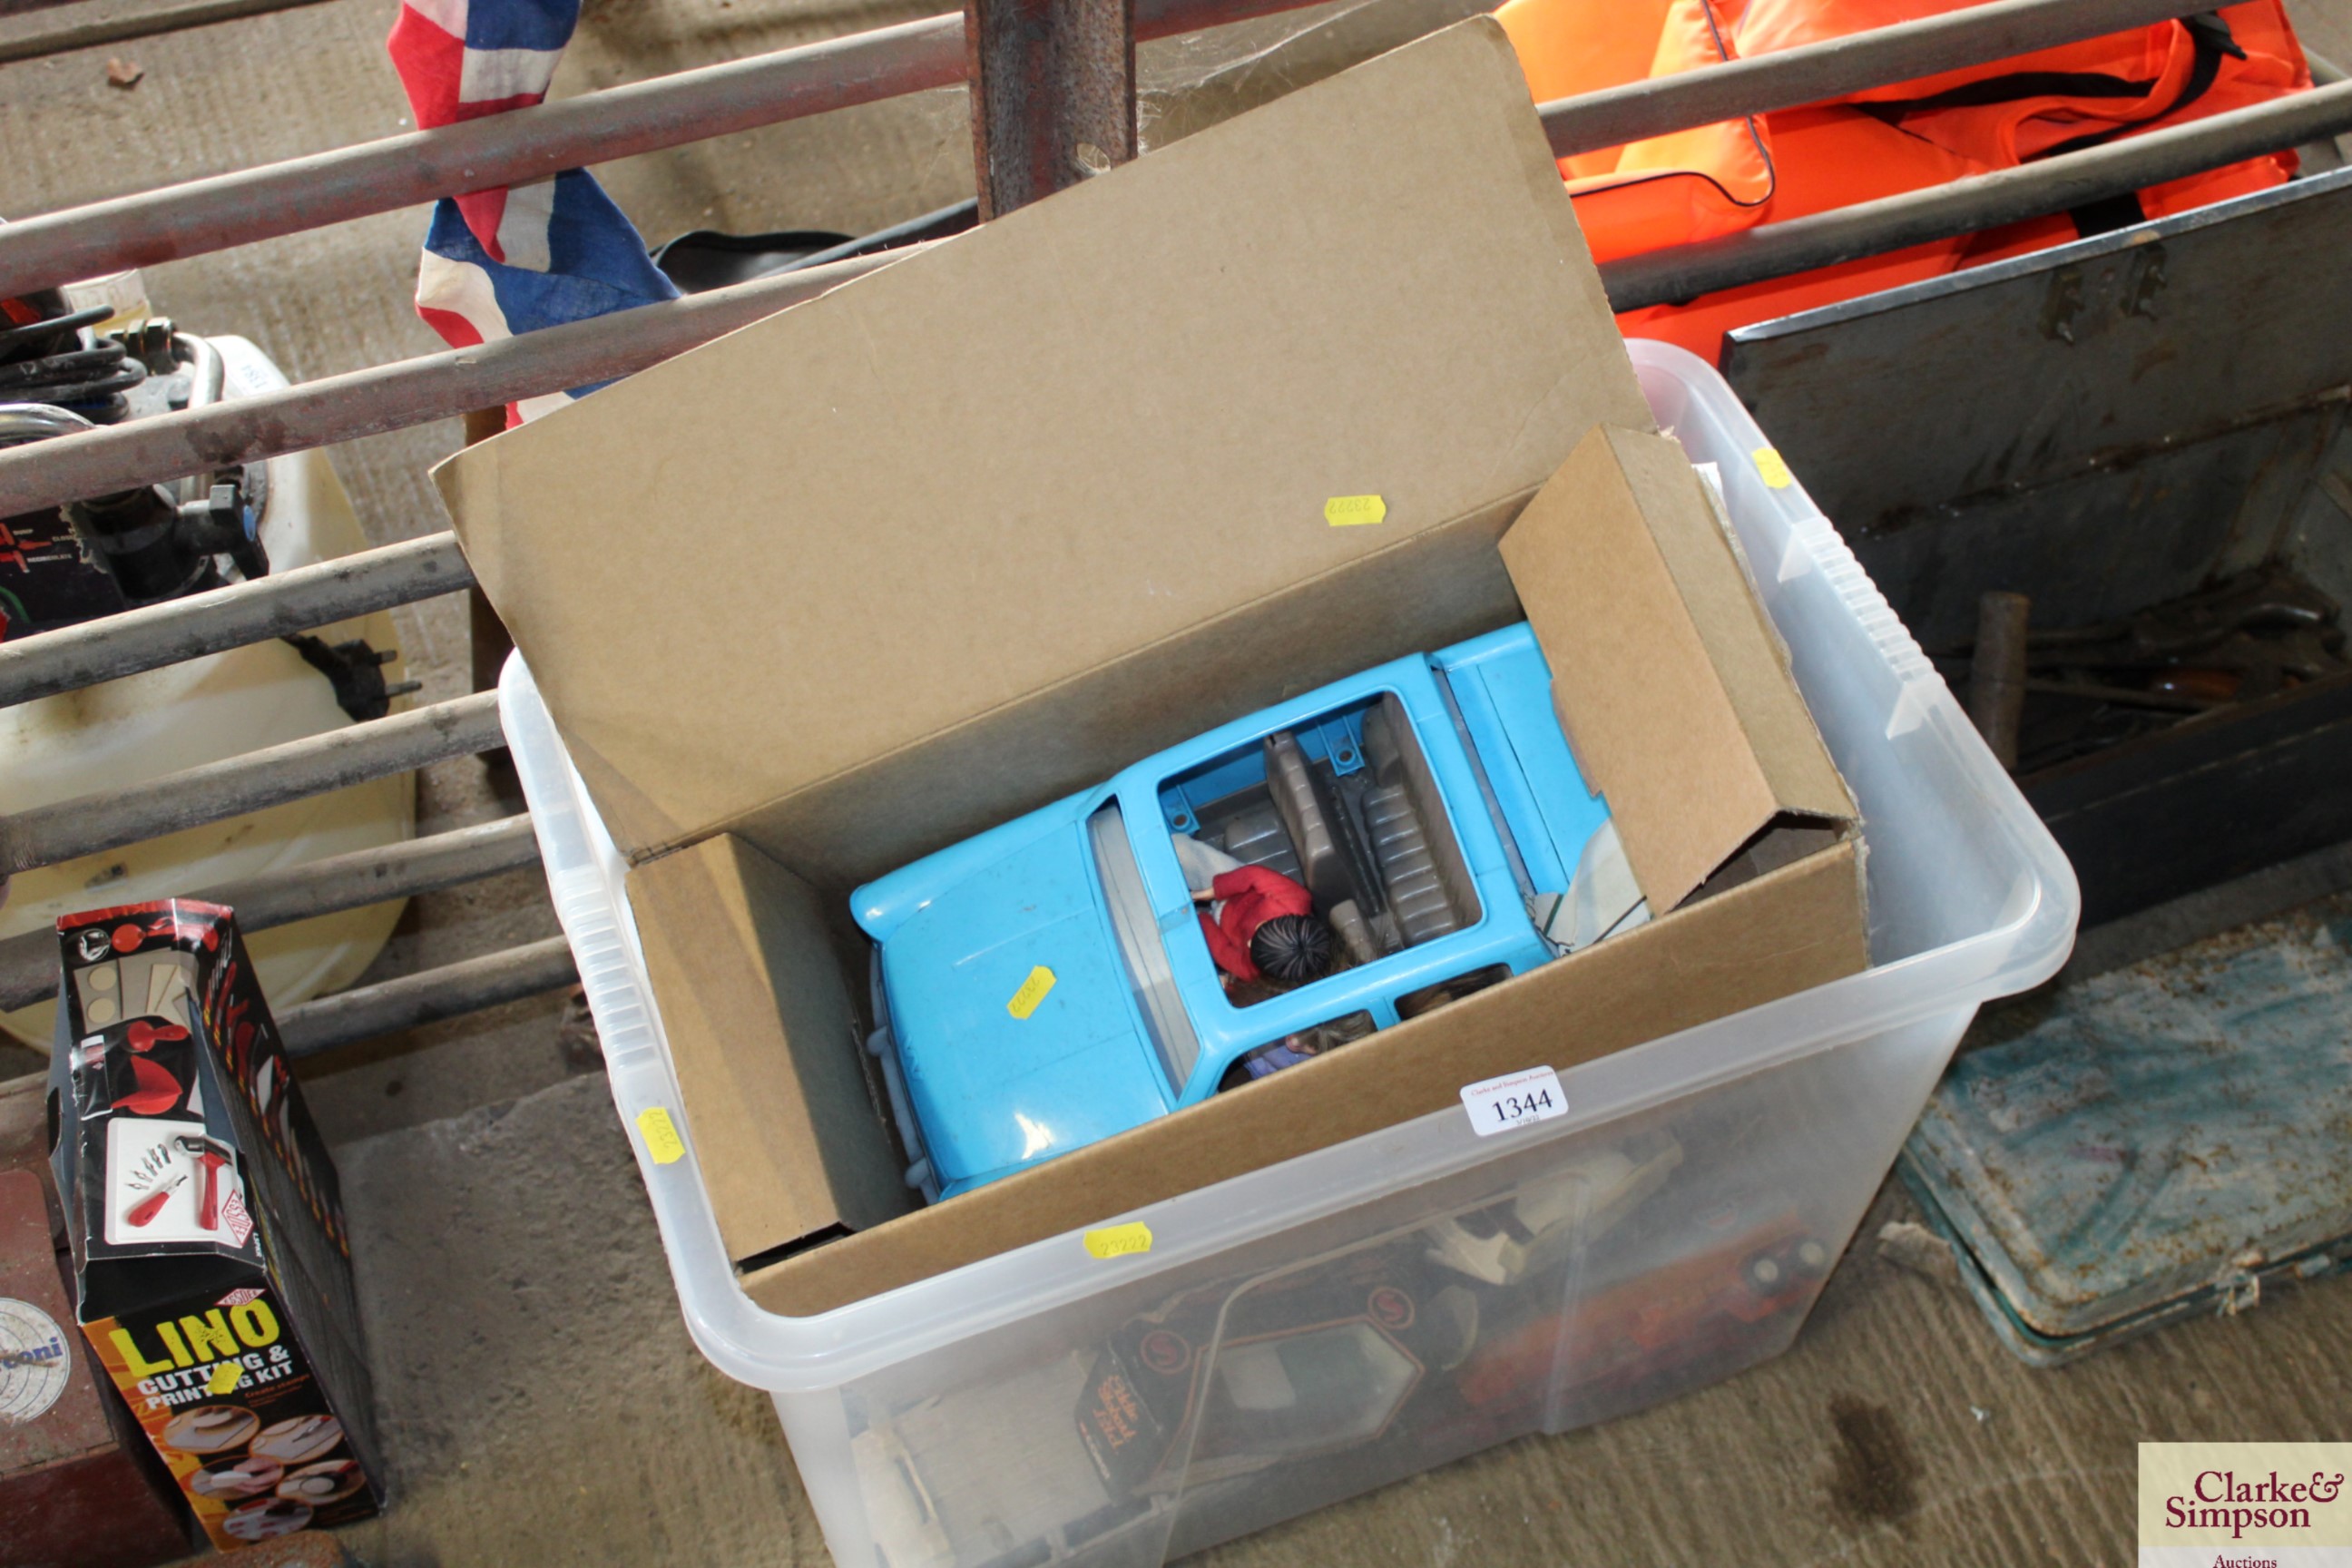 A box containing various toy cars etc.